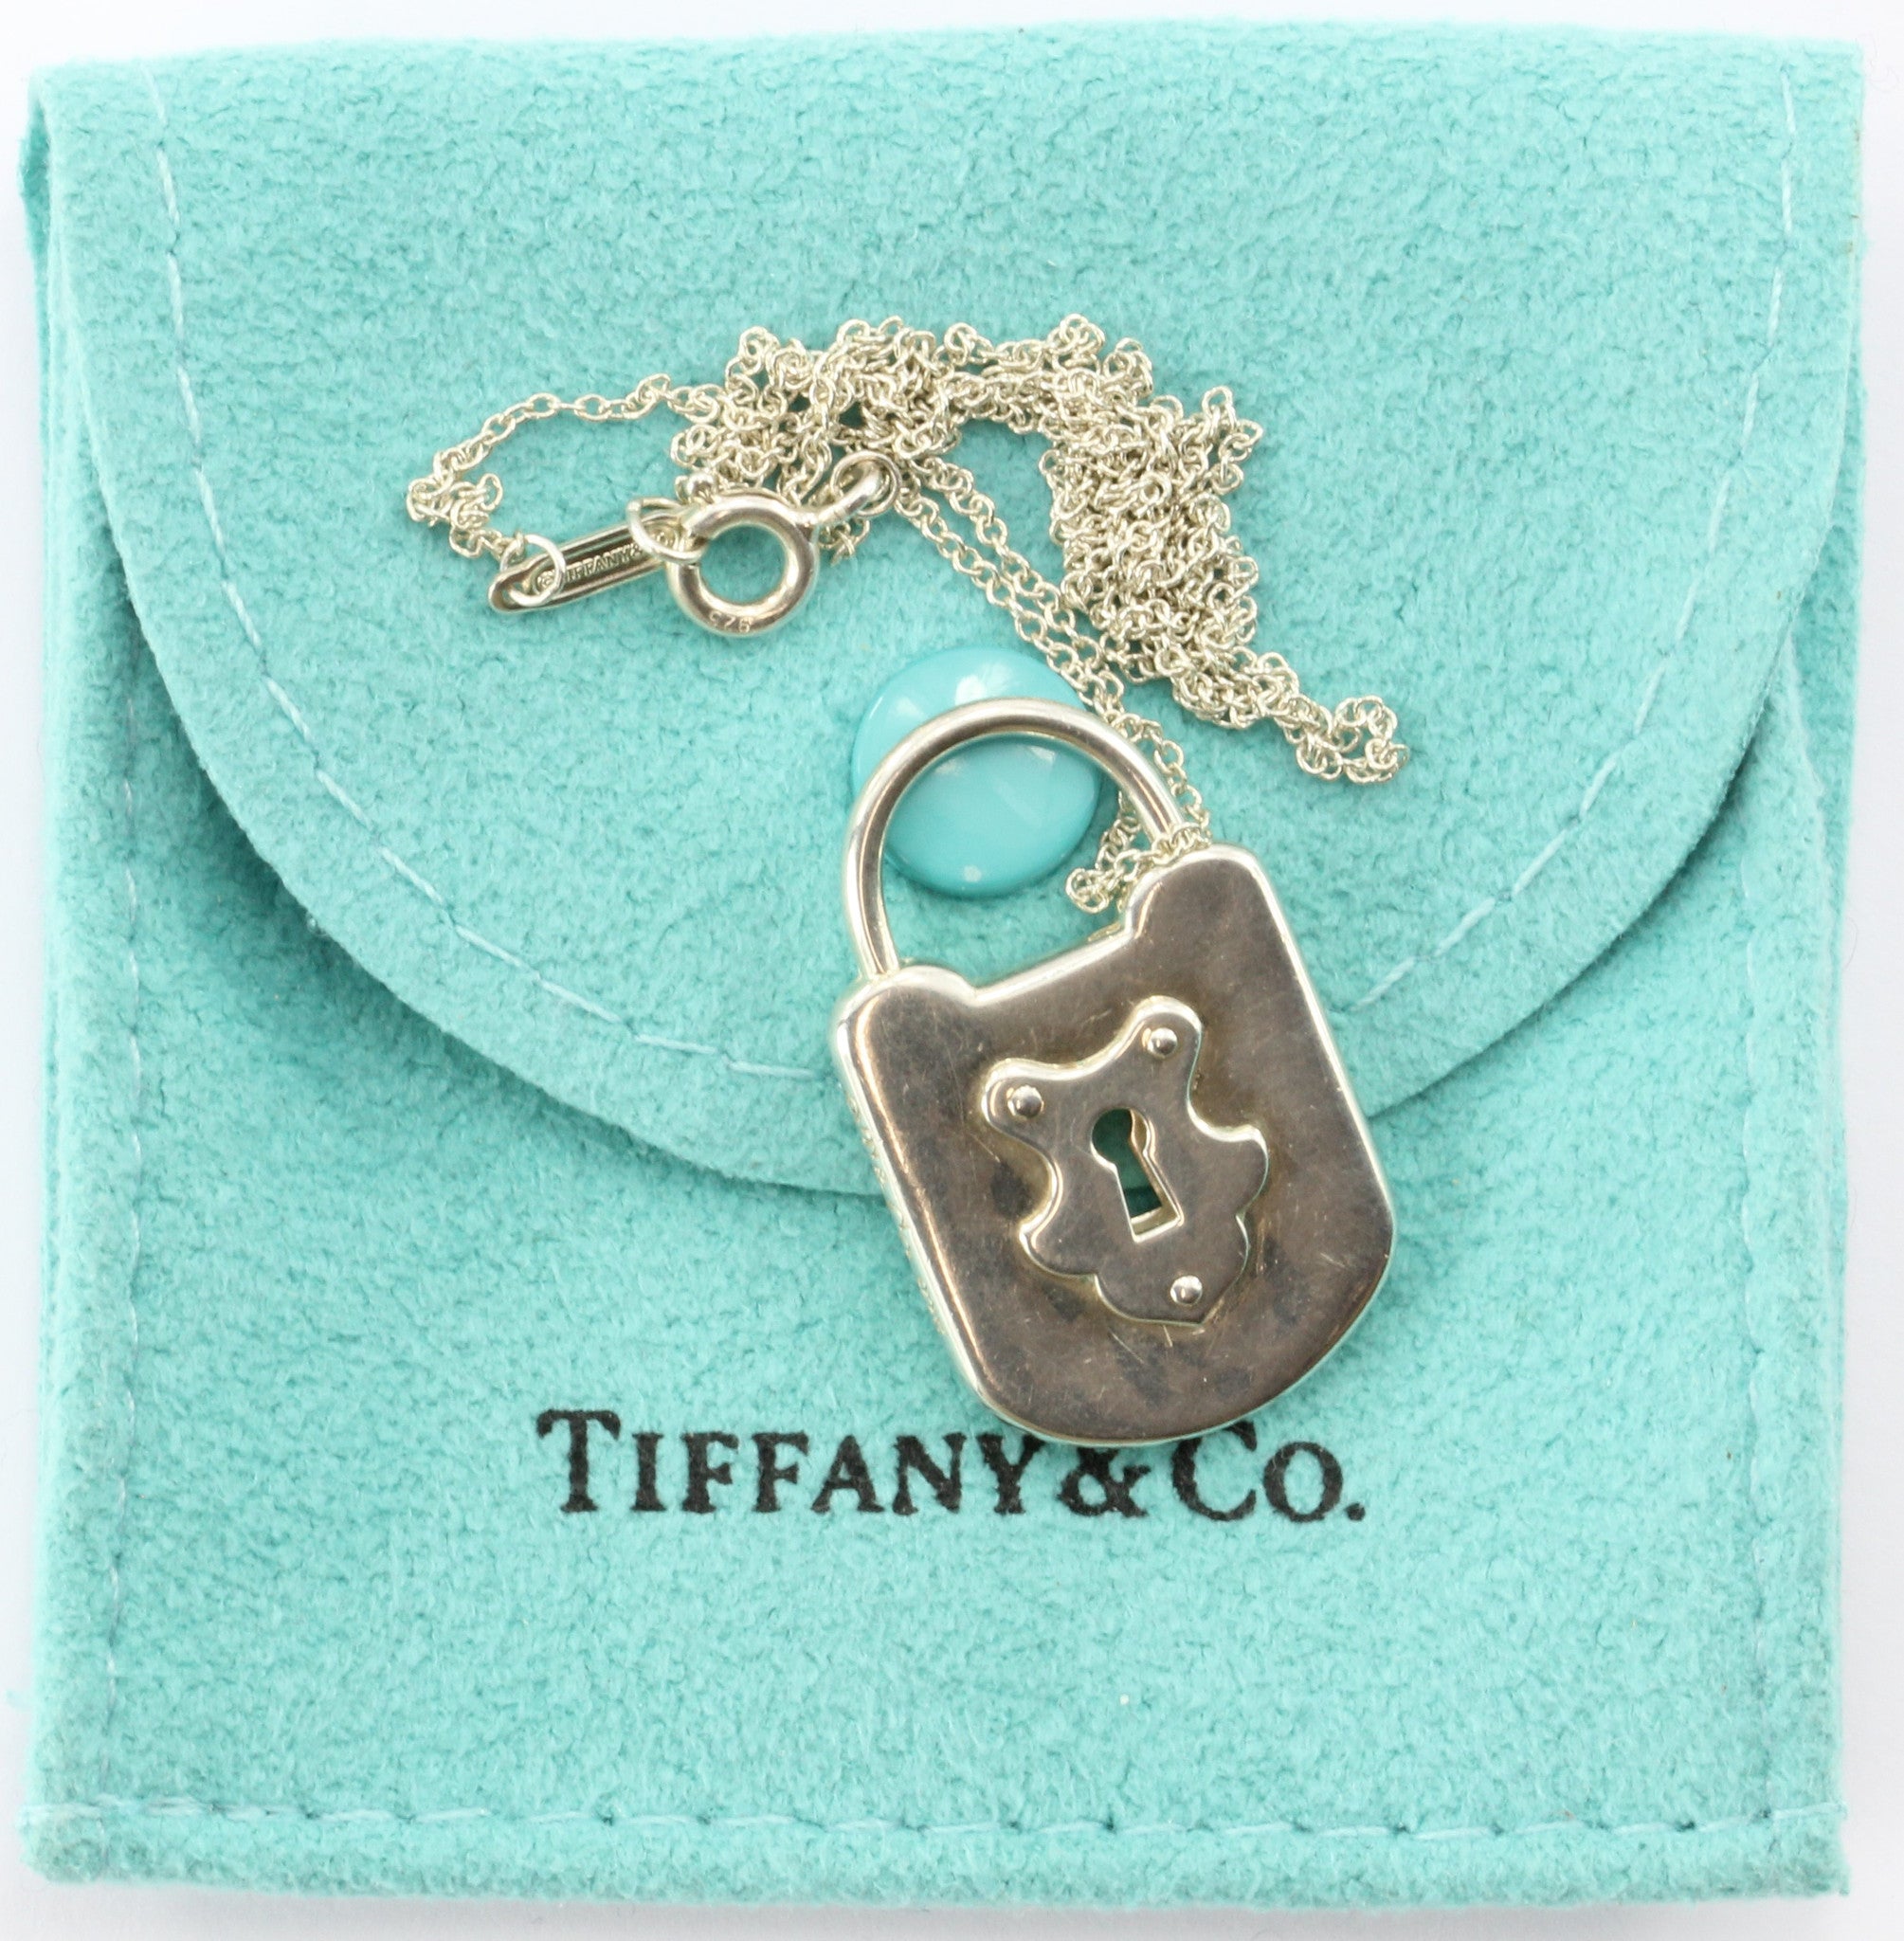 Tiffany & Co Sterling Silver Padlock Lock Charm Pendant Necklace – QUEEN MAY